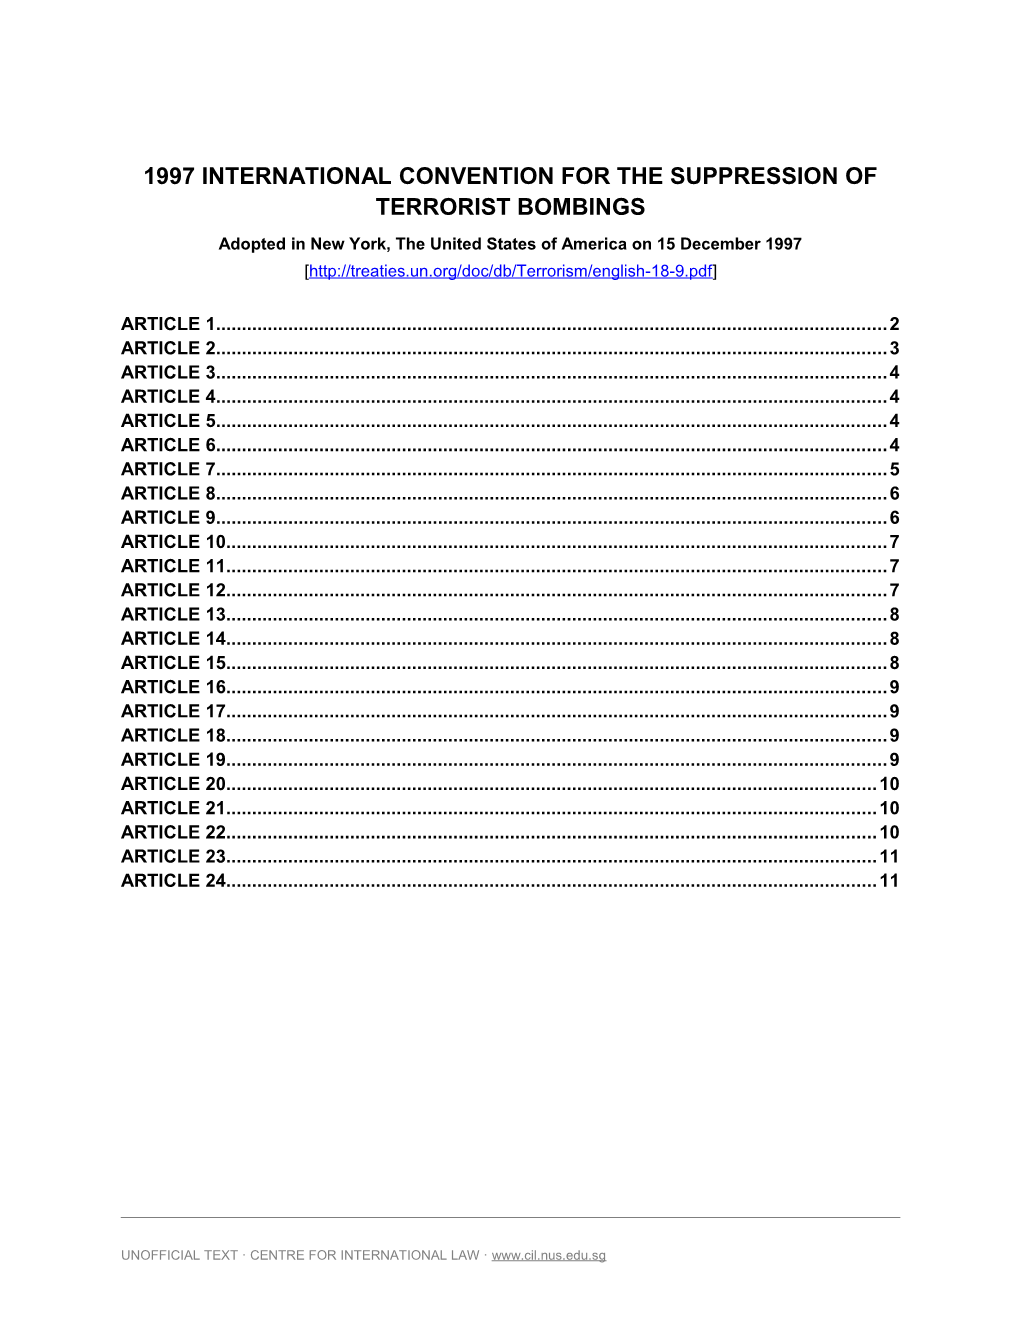 1997 International Convention for the Suppression of Terrorist Bombings